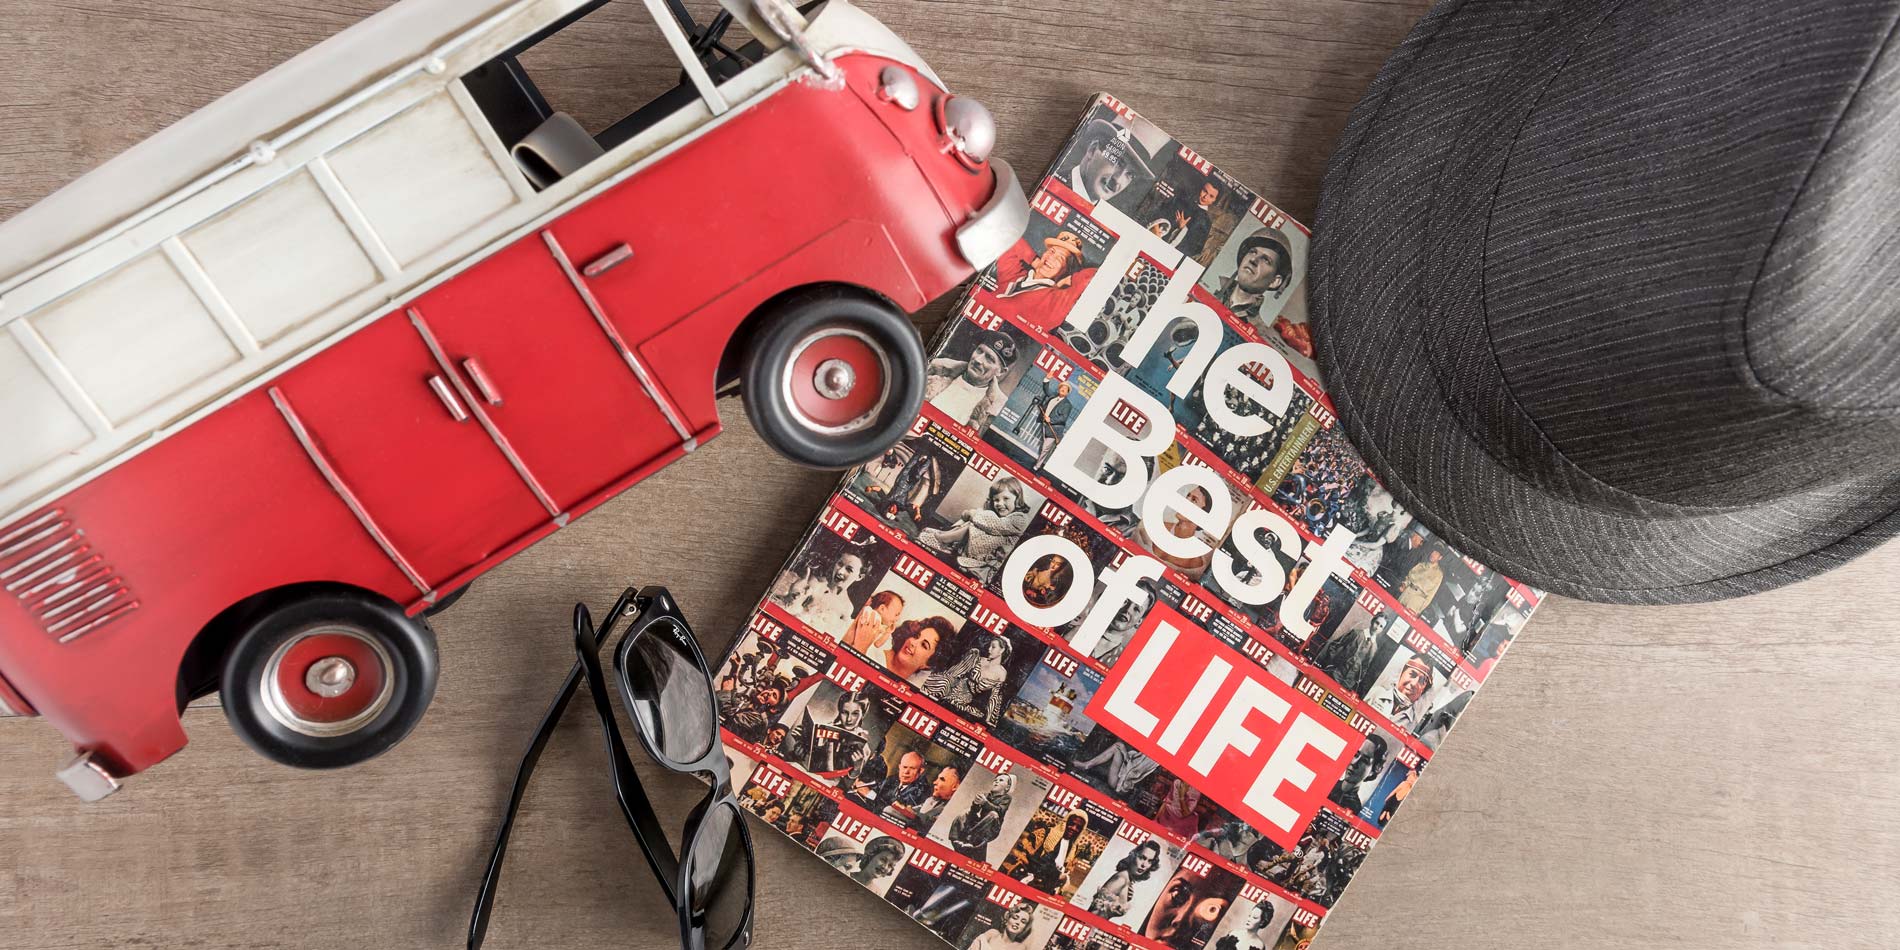 the best of life magazine, bus, hat, and sunglasses from the 50's on a table